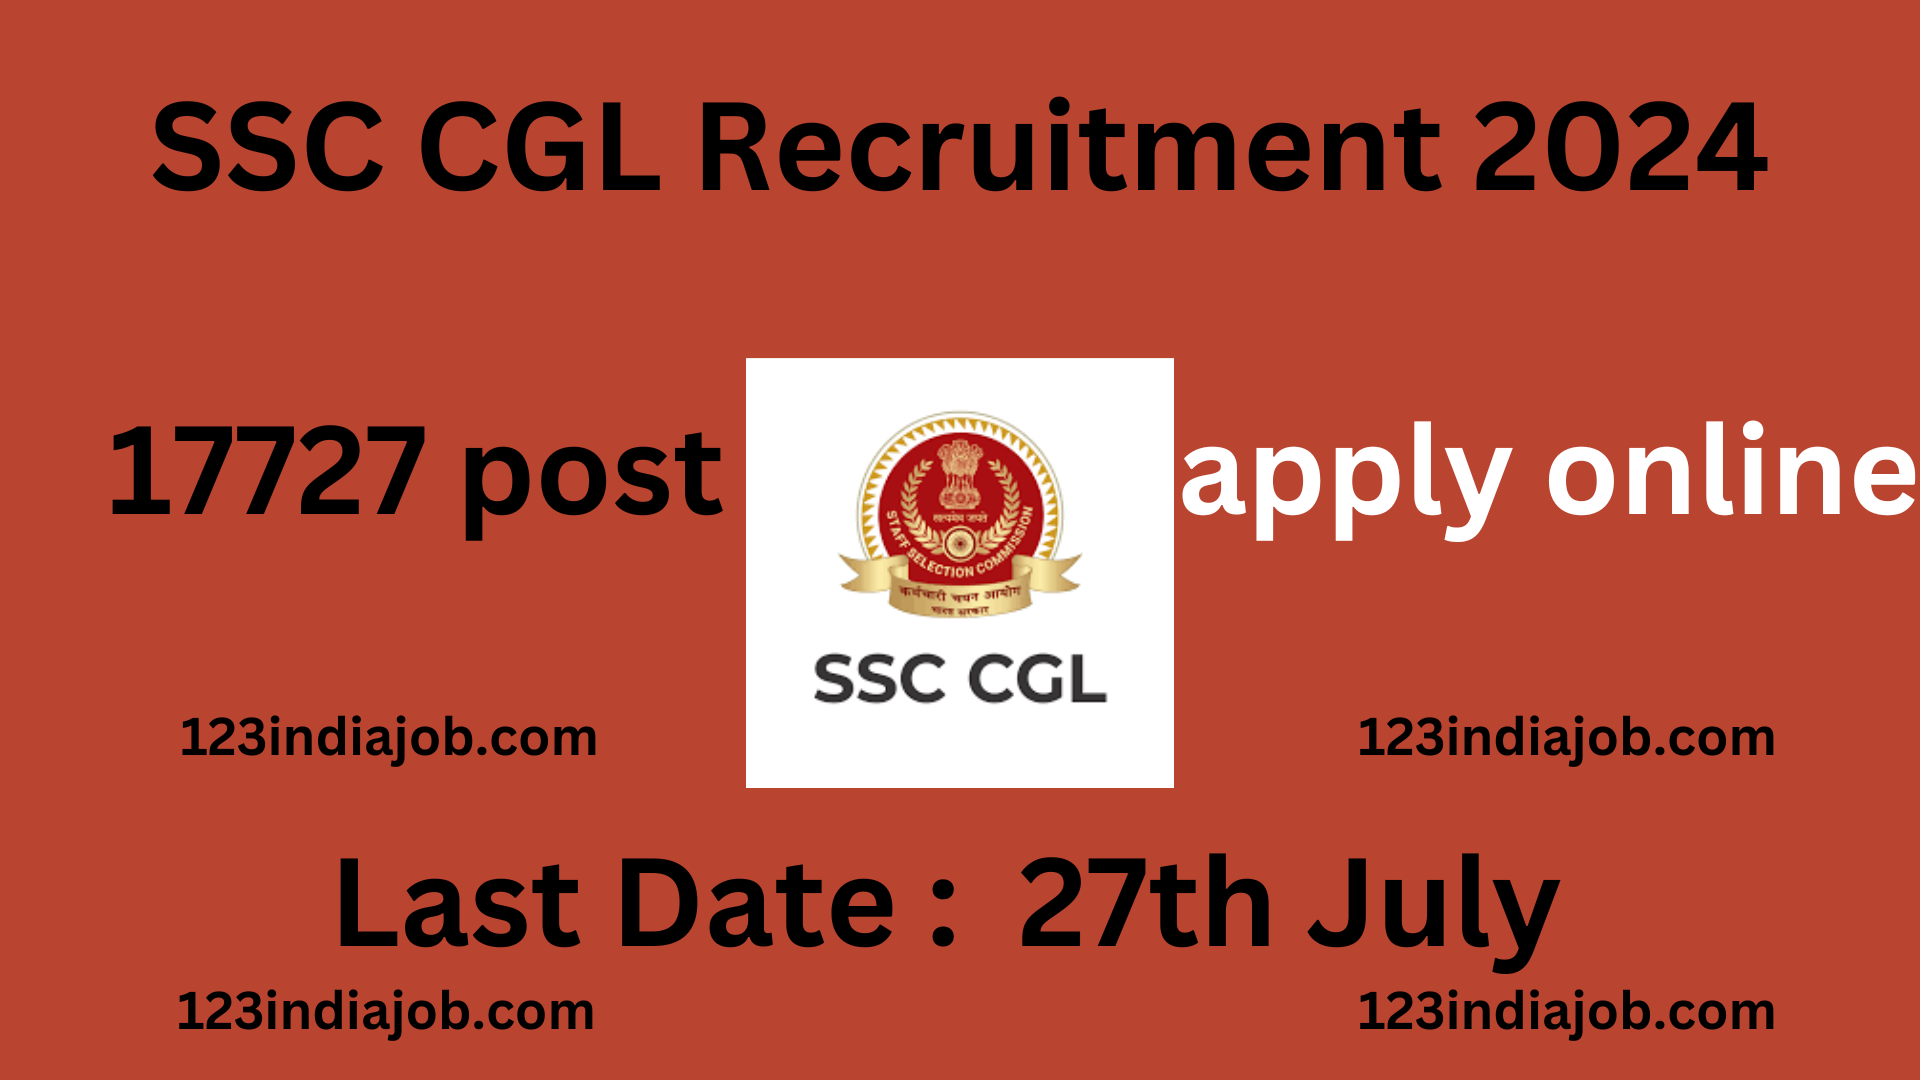 SSC CGL Recruitment 2024 – Apply For 17727 Vacancies ! Apply Online Here